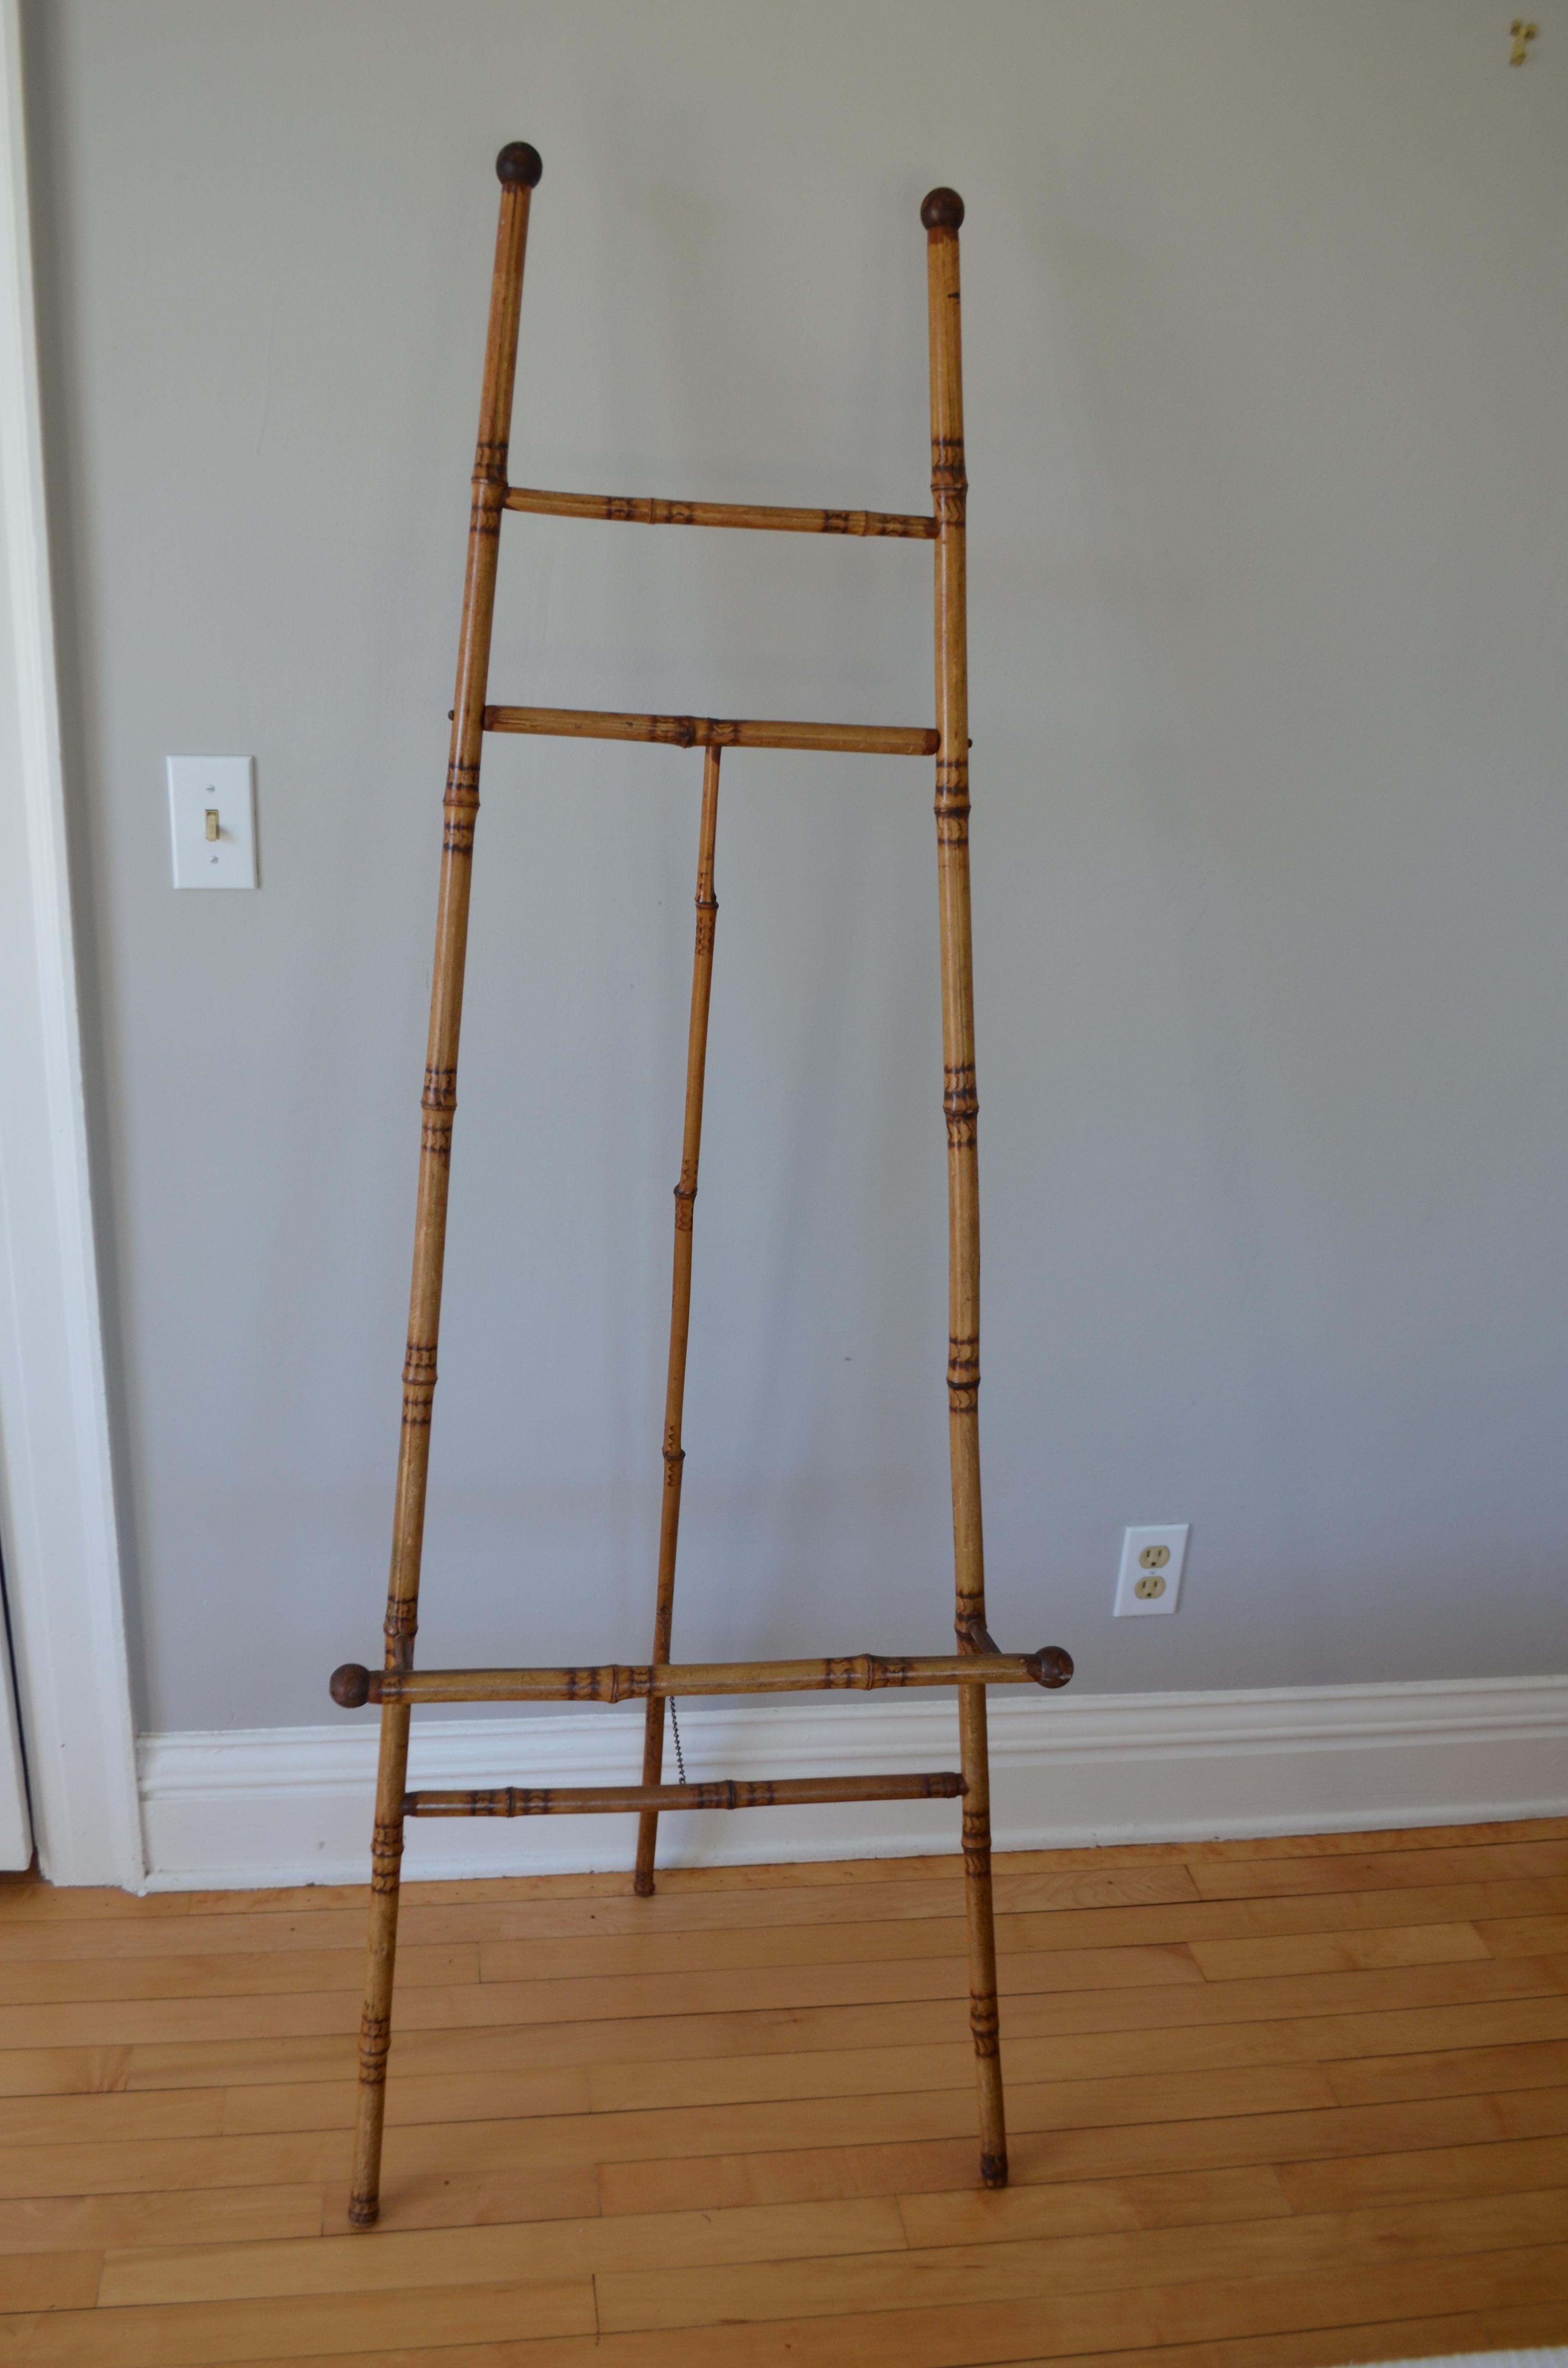 Late 19th century bamboo easel from France. Create a mobile, rotating display of your artwork on this easel that you can easily move from room to room, corner to corner as your mood dictates. Or enhance a room's decor with differing looks of art.